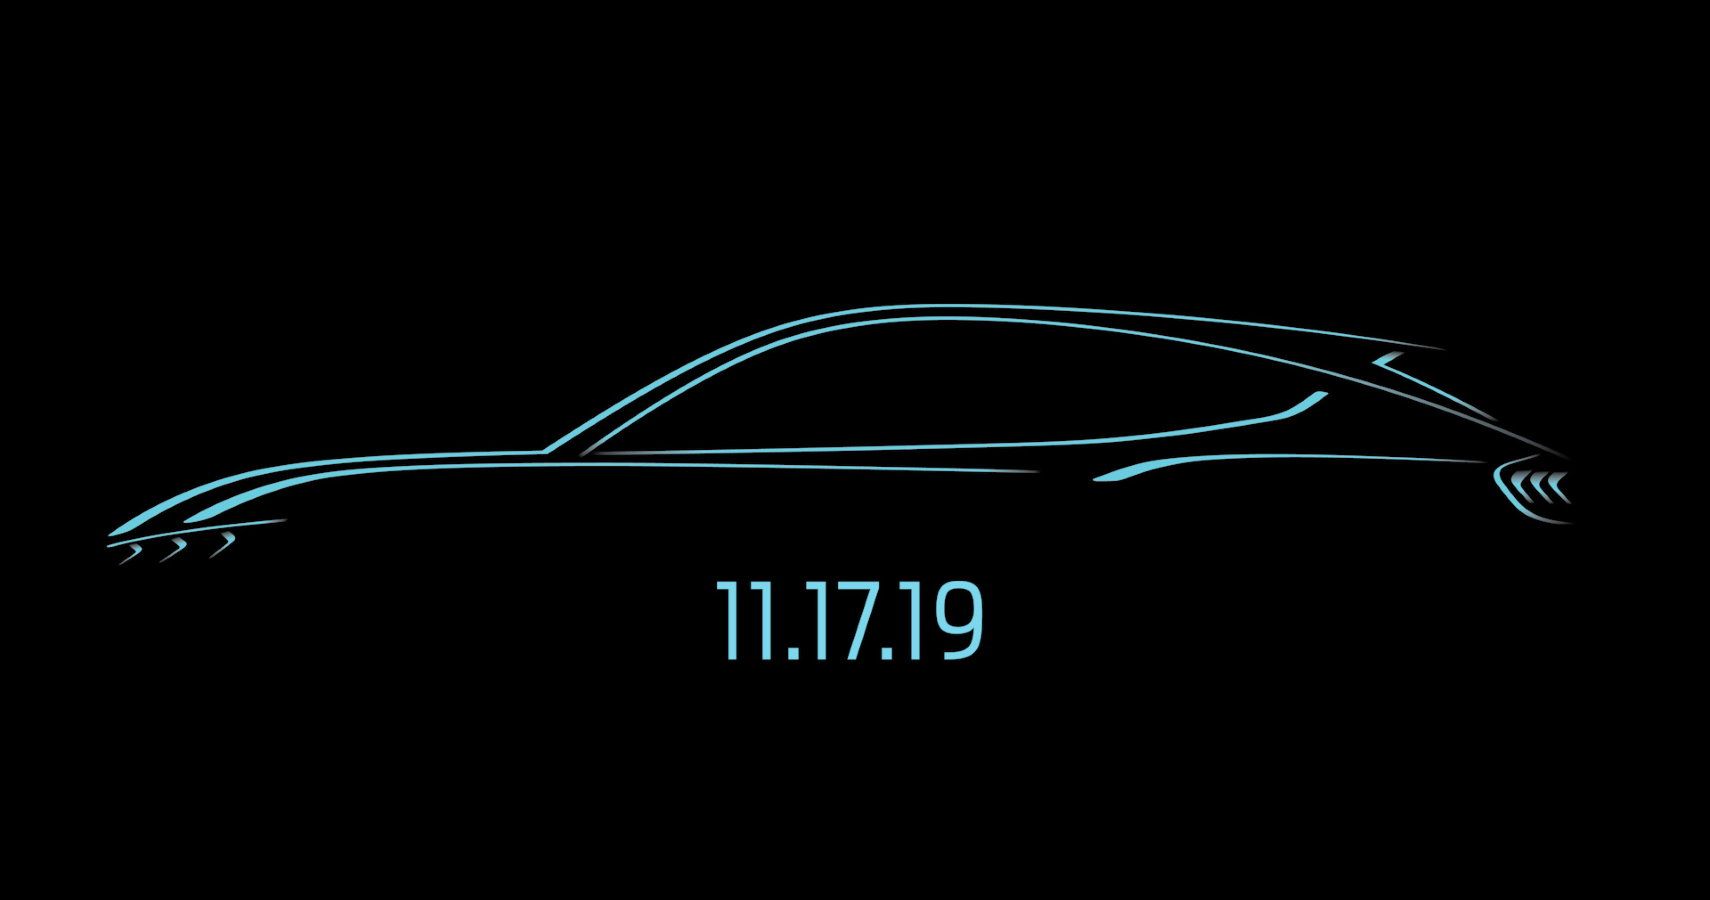 Ford is gearing up to unveil its all-electric, Mustang-inspired SUV across the globe on November 17, 2019.